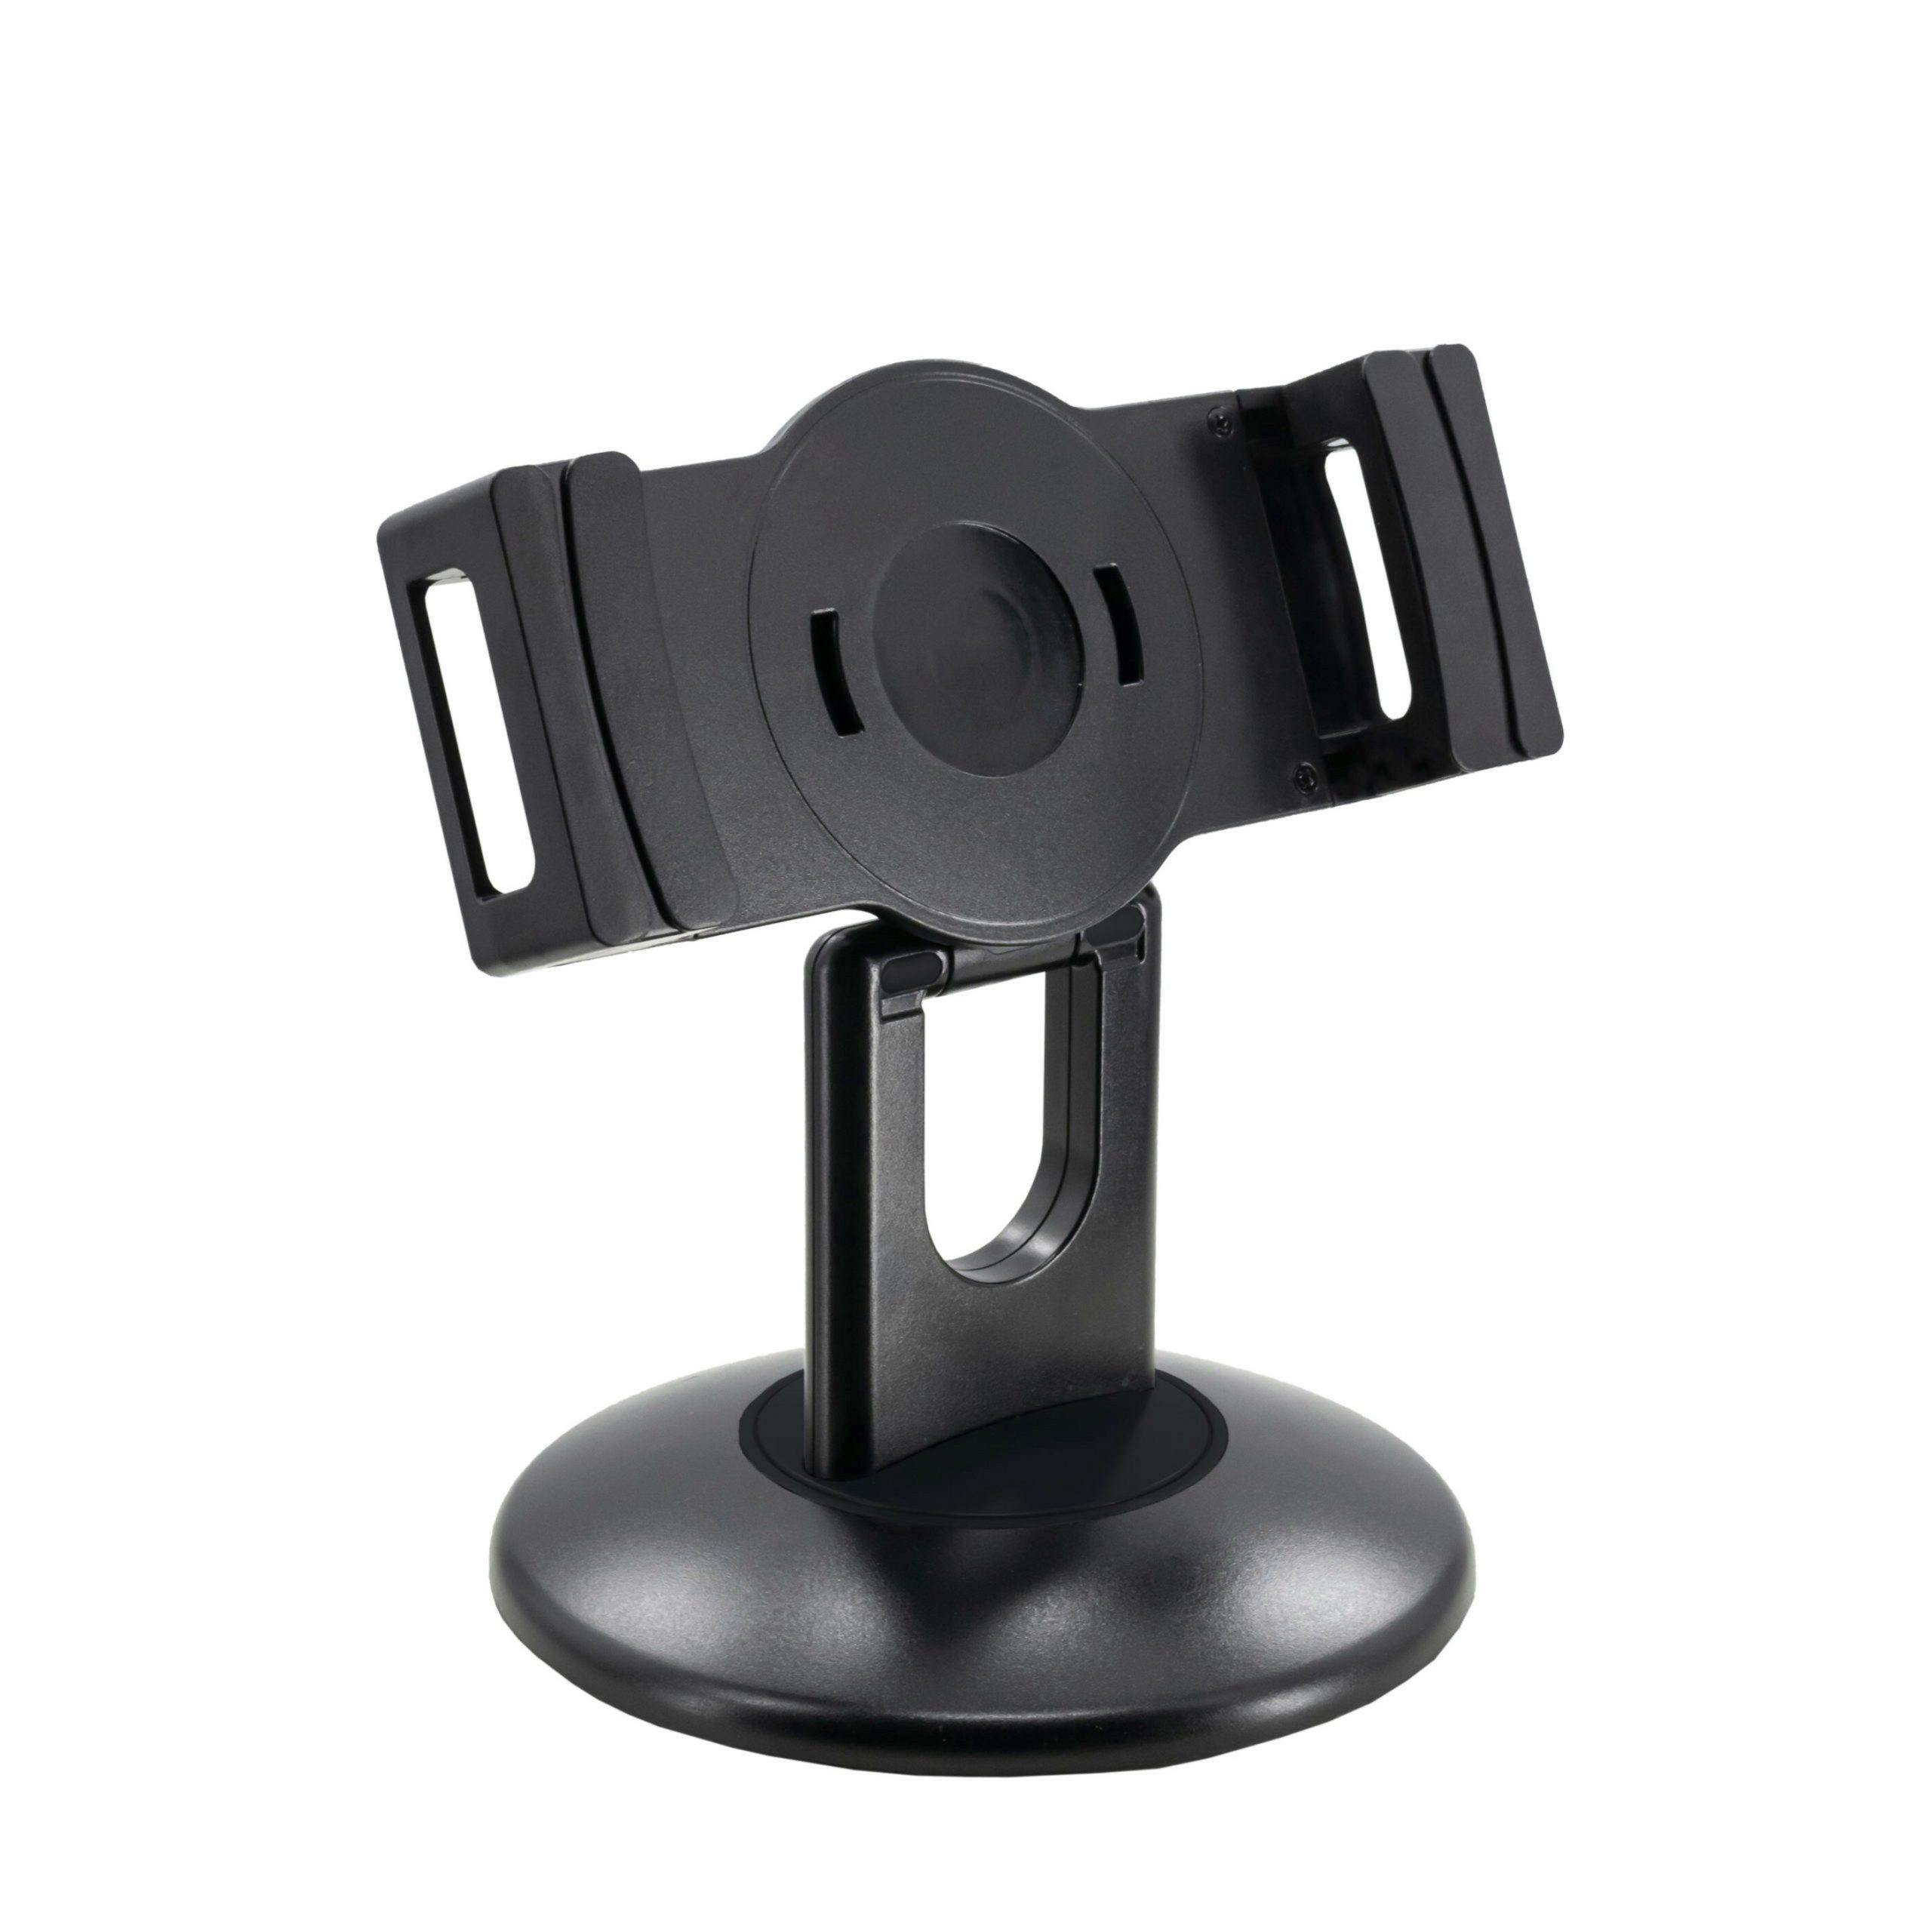 Cta Digital Accessories Quick-Connect Desk Mount for Tablets, BlackUp to 12.9″ Screen Support9″ Height x 7.1″ Width x 7.1″ DepthDesktop, Tabletop,… PAD-QCDM